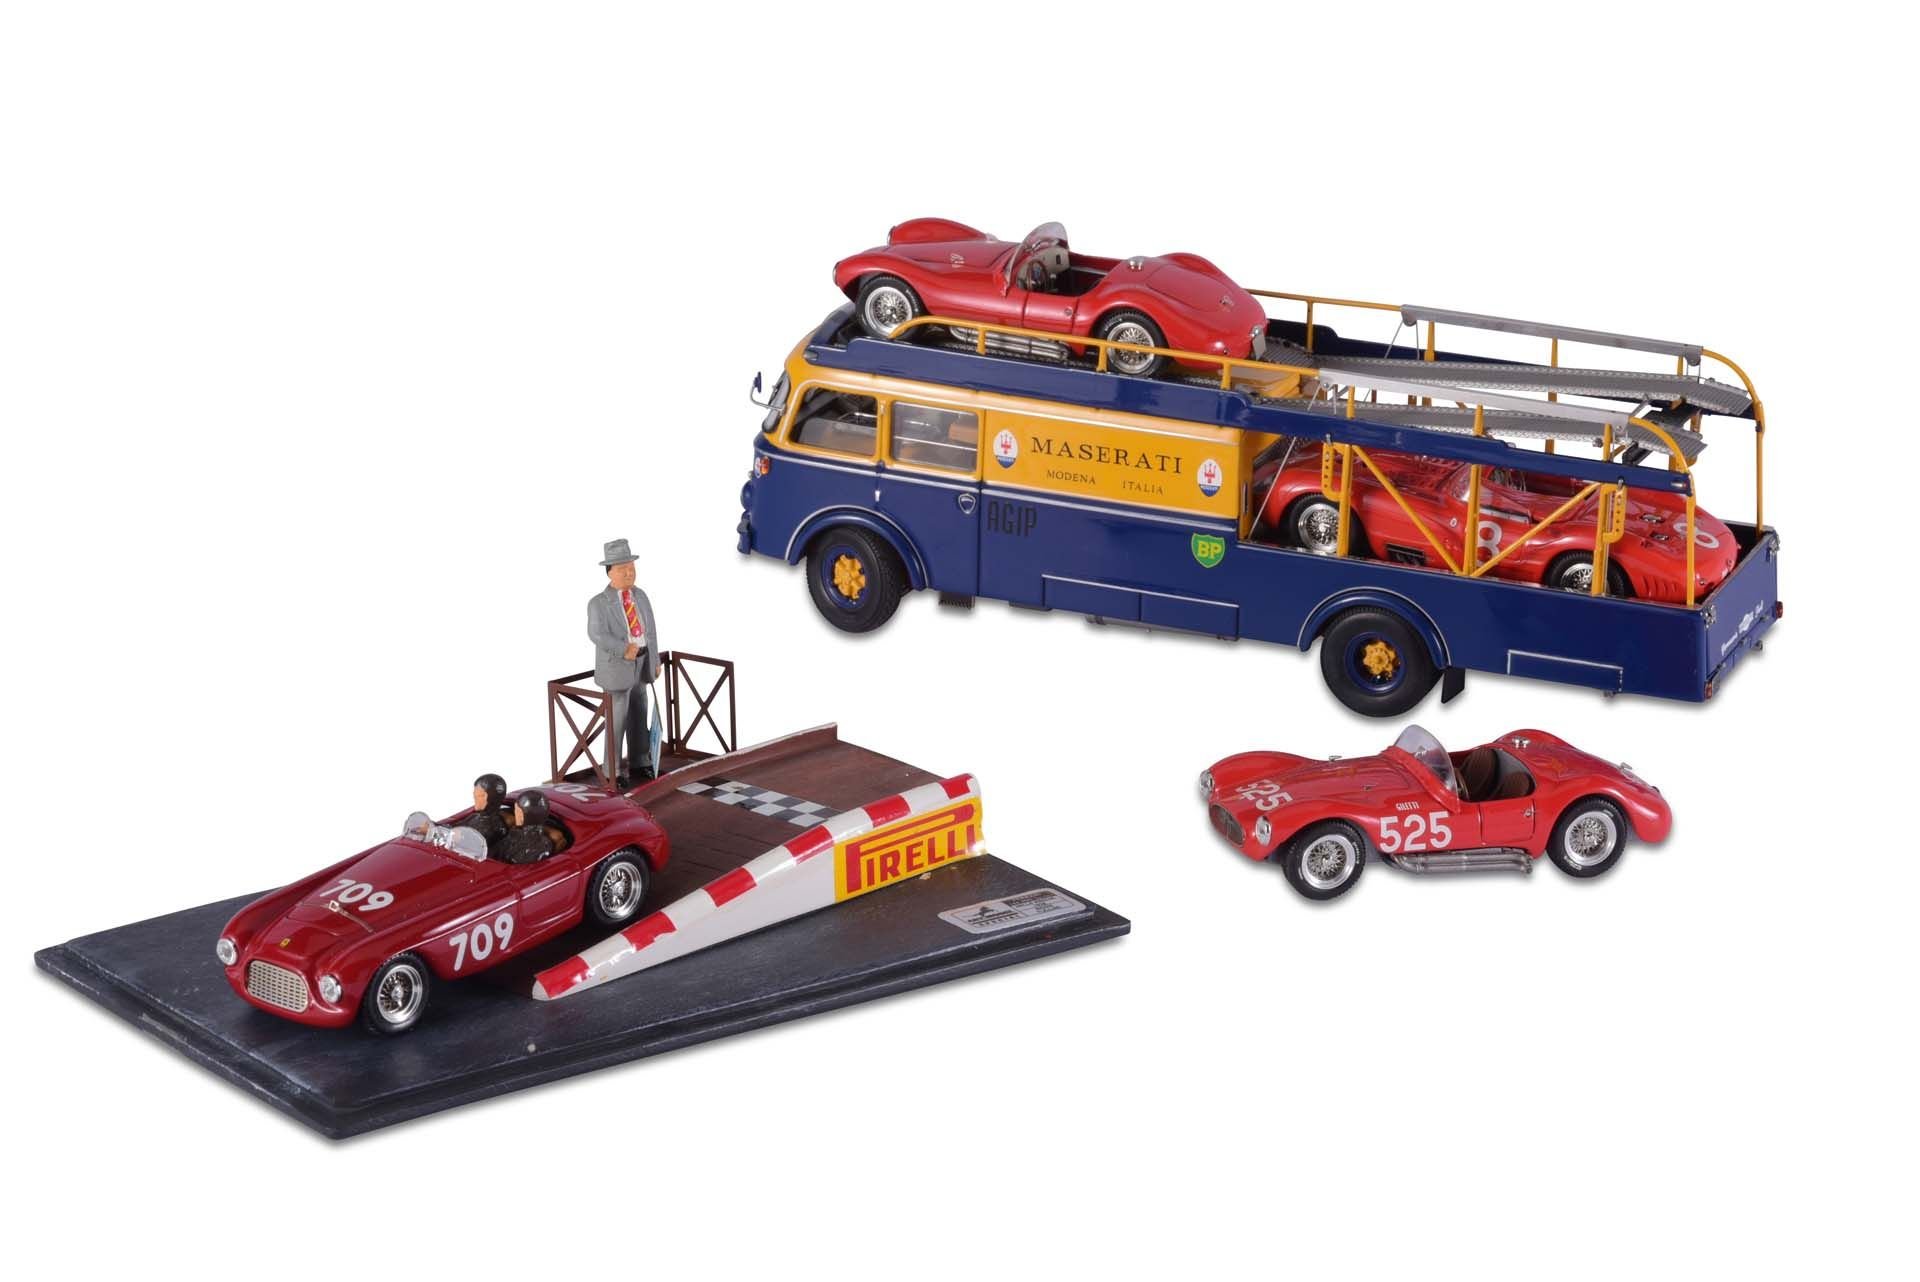 For Sale Pair of Models including Maserati Transporter with three model Maseratis and Ferrari racing model